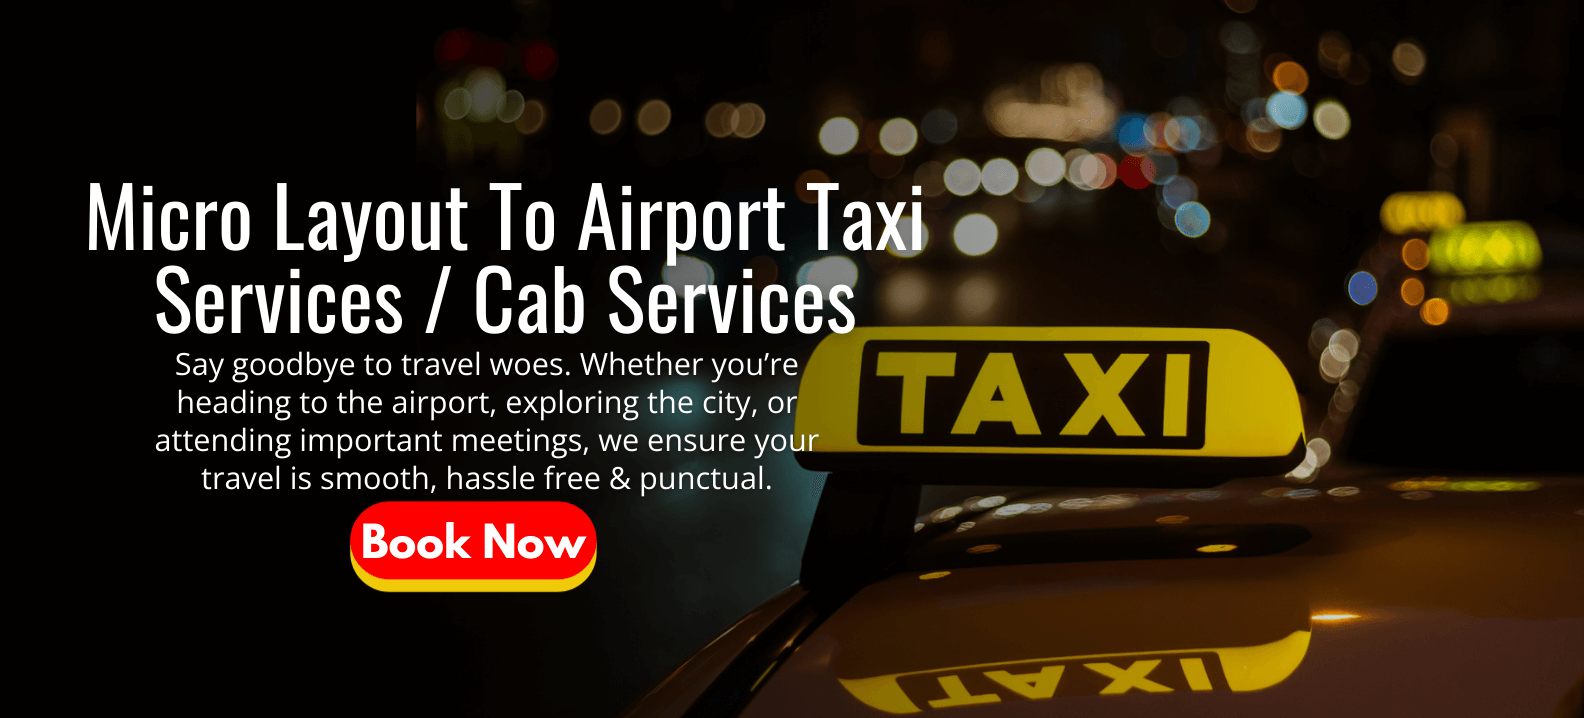 Microlayout to Airport Taxi Services | Cab Services